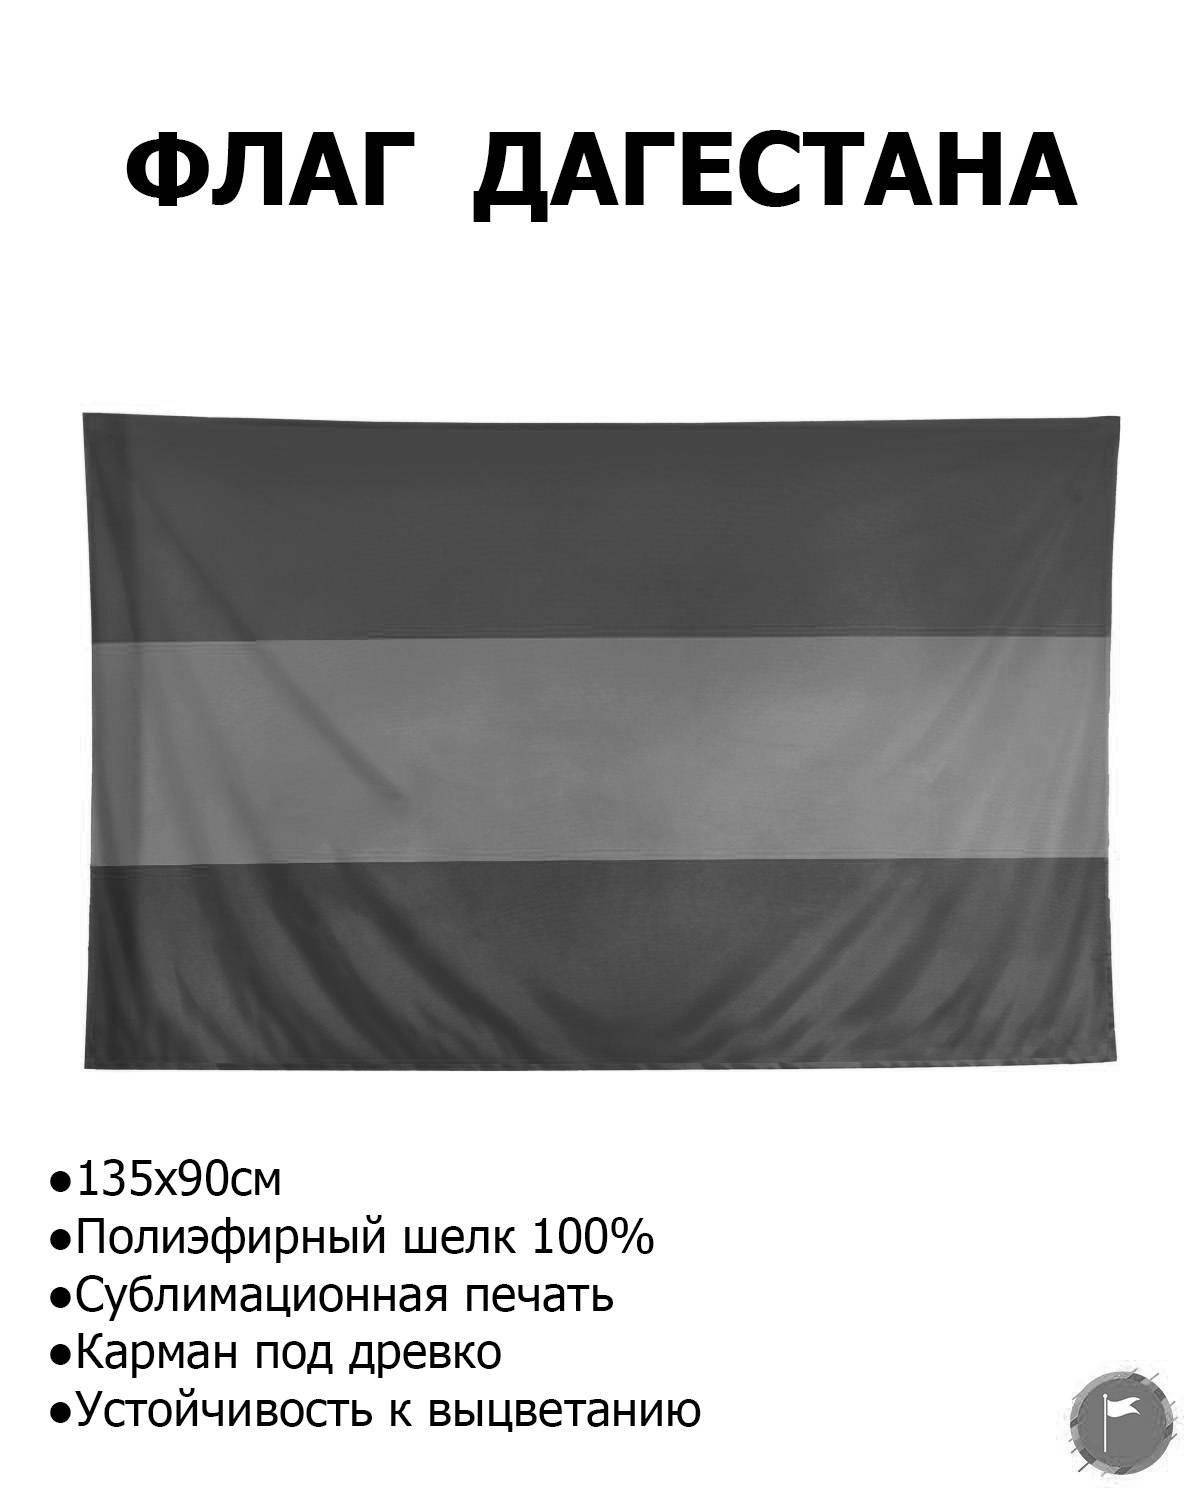 Coloring page dramatic flag of dagestan